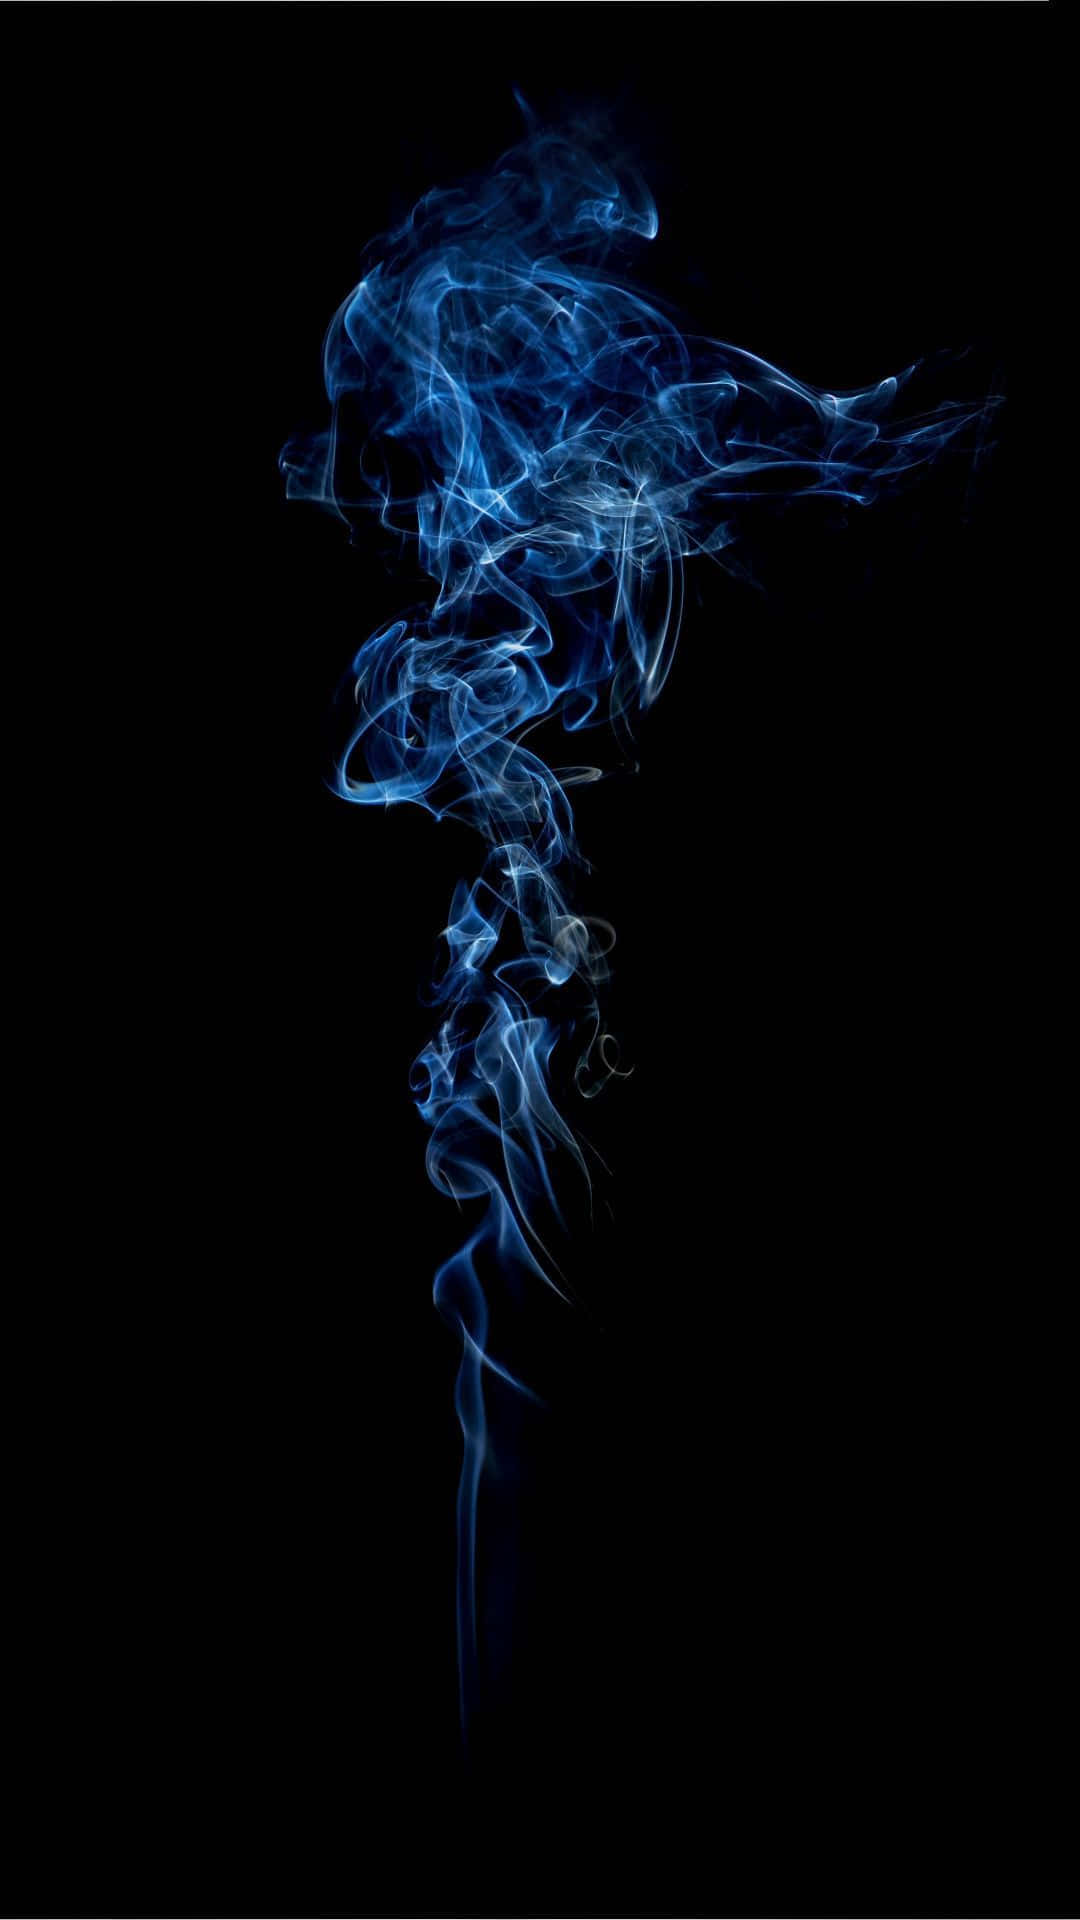 100+ Black Smoke Pictures [HD] | Download Free Images & Stock Photos on  Unsplash